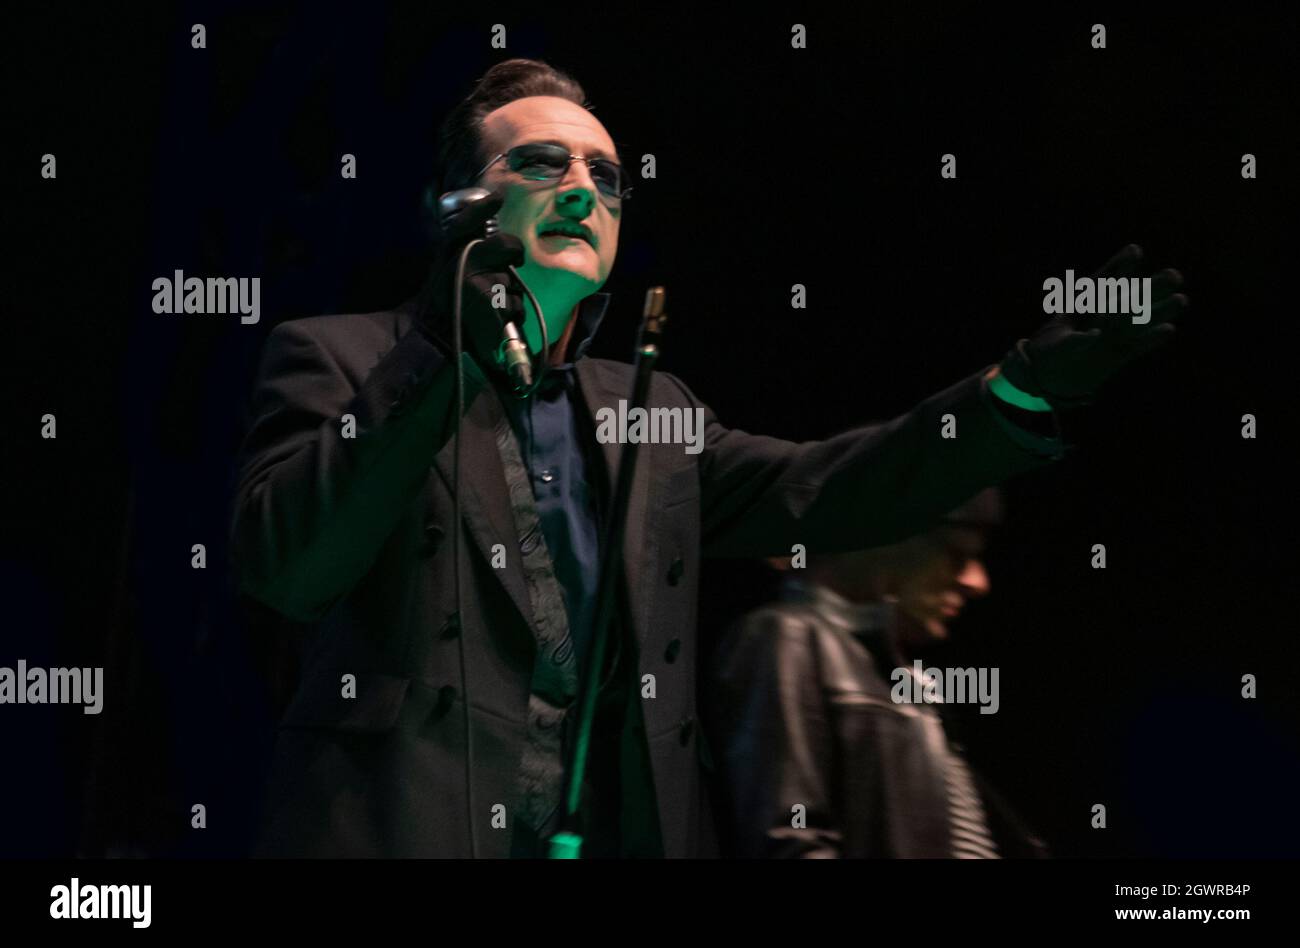 Dave Vanian, The Damned Vocalist, live in concert at Birmingham Genting Arena, 16th June 2018. Live Music Photography. Stock Photo